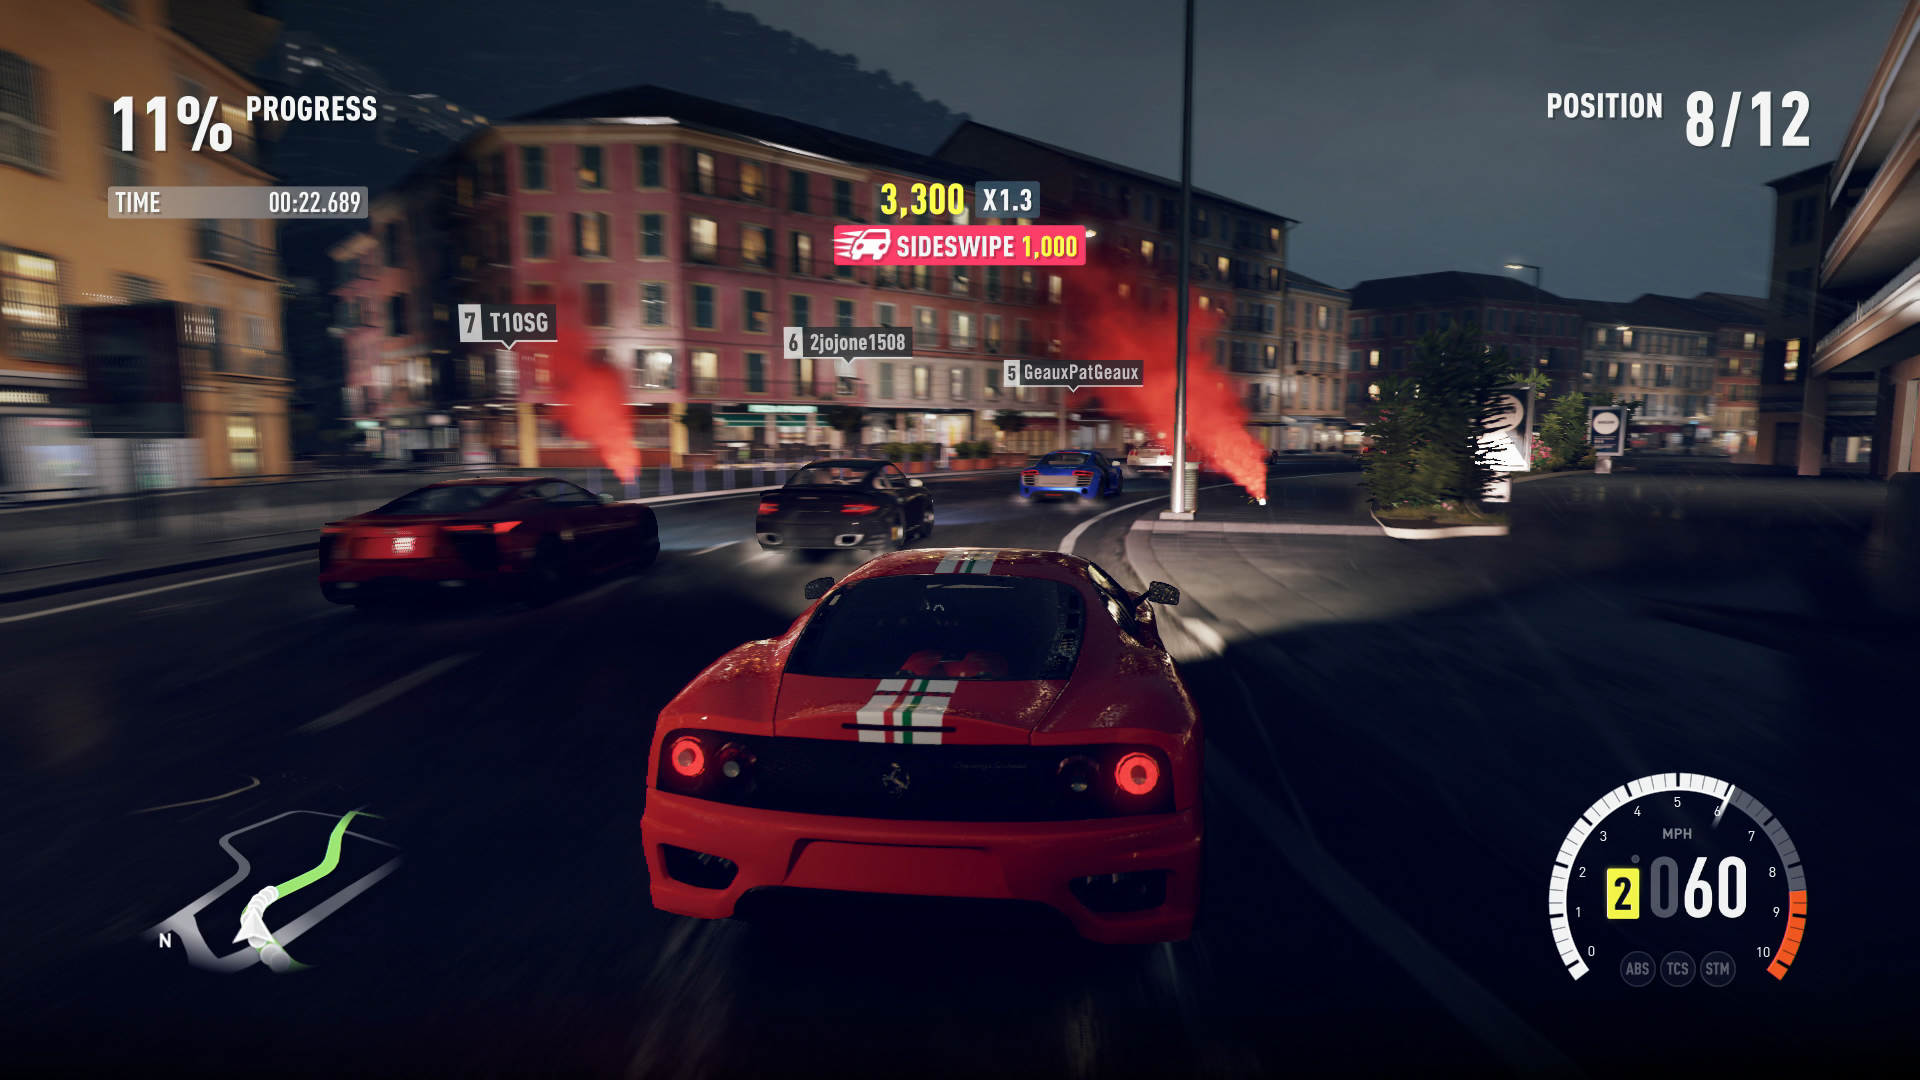 Racing at night in the city